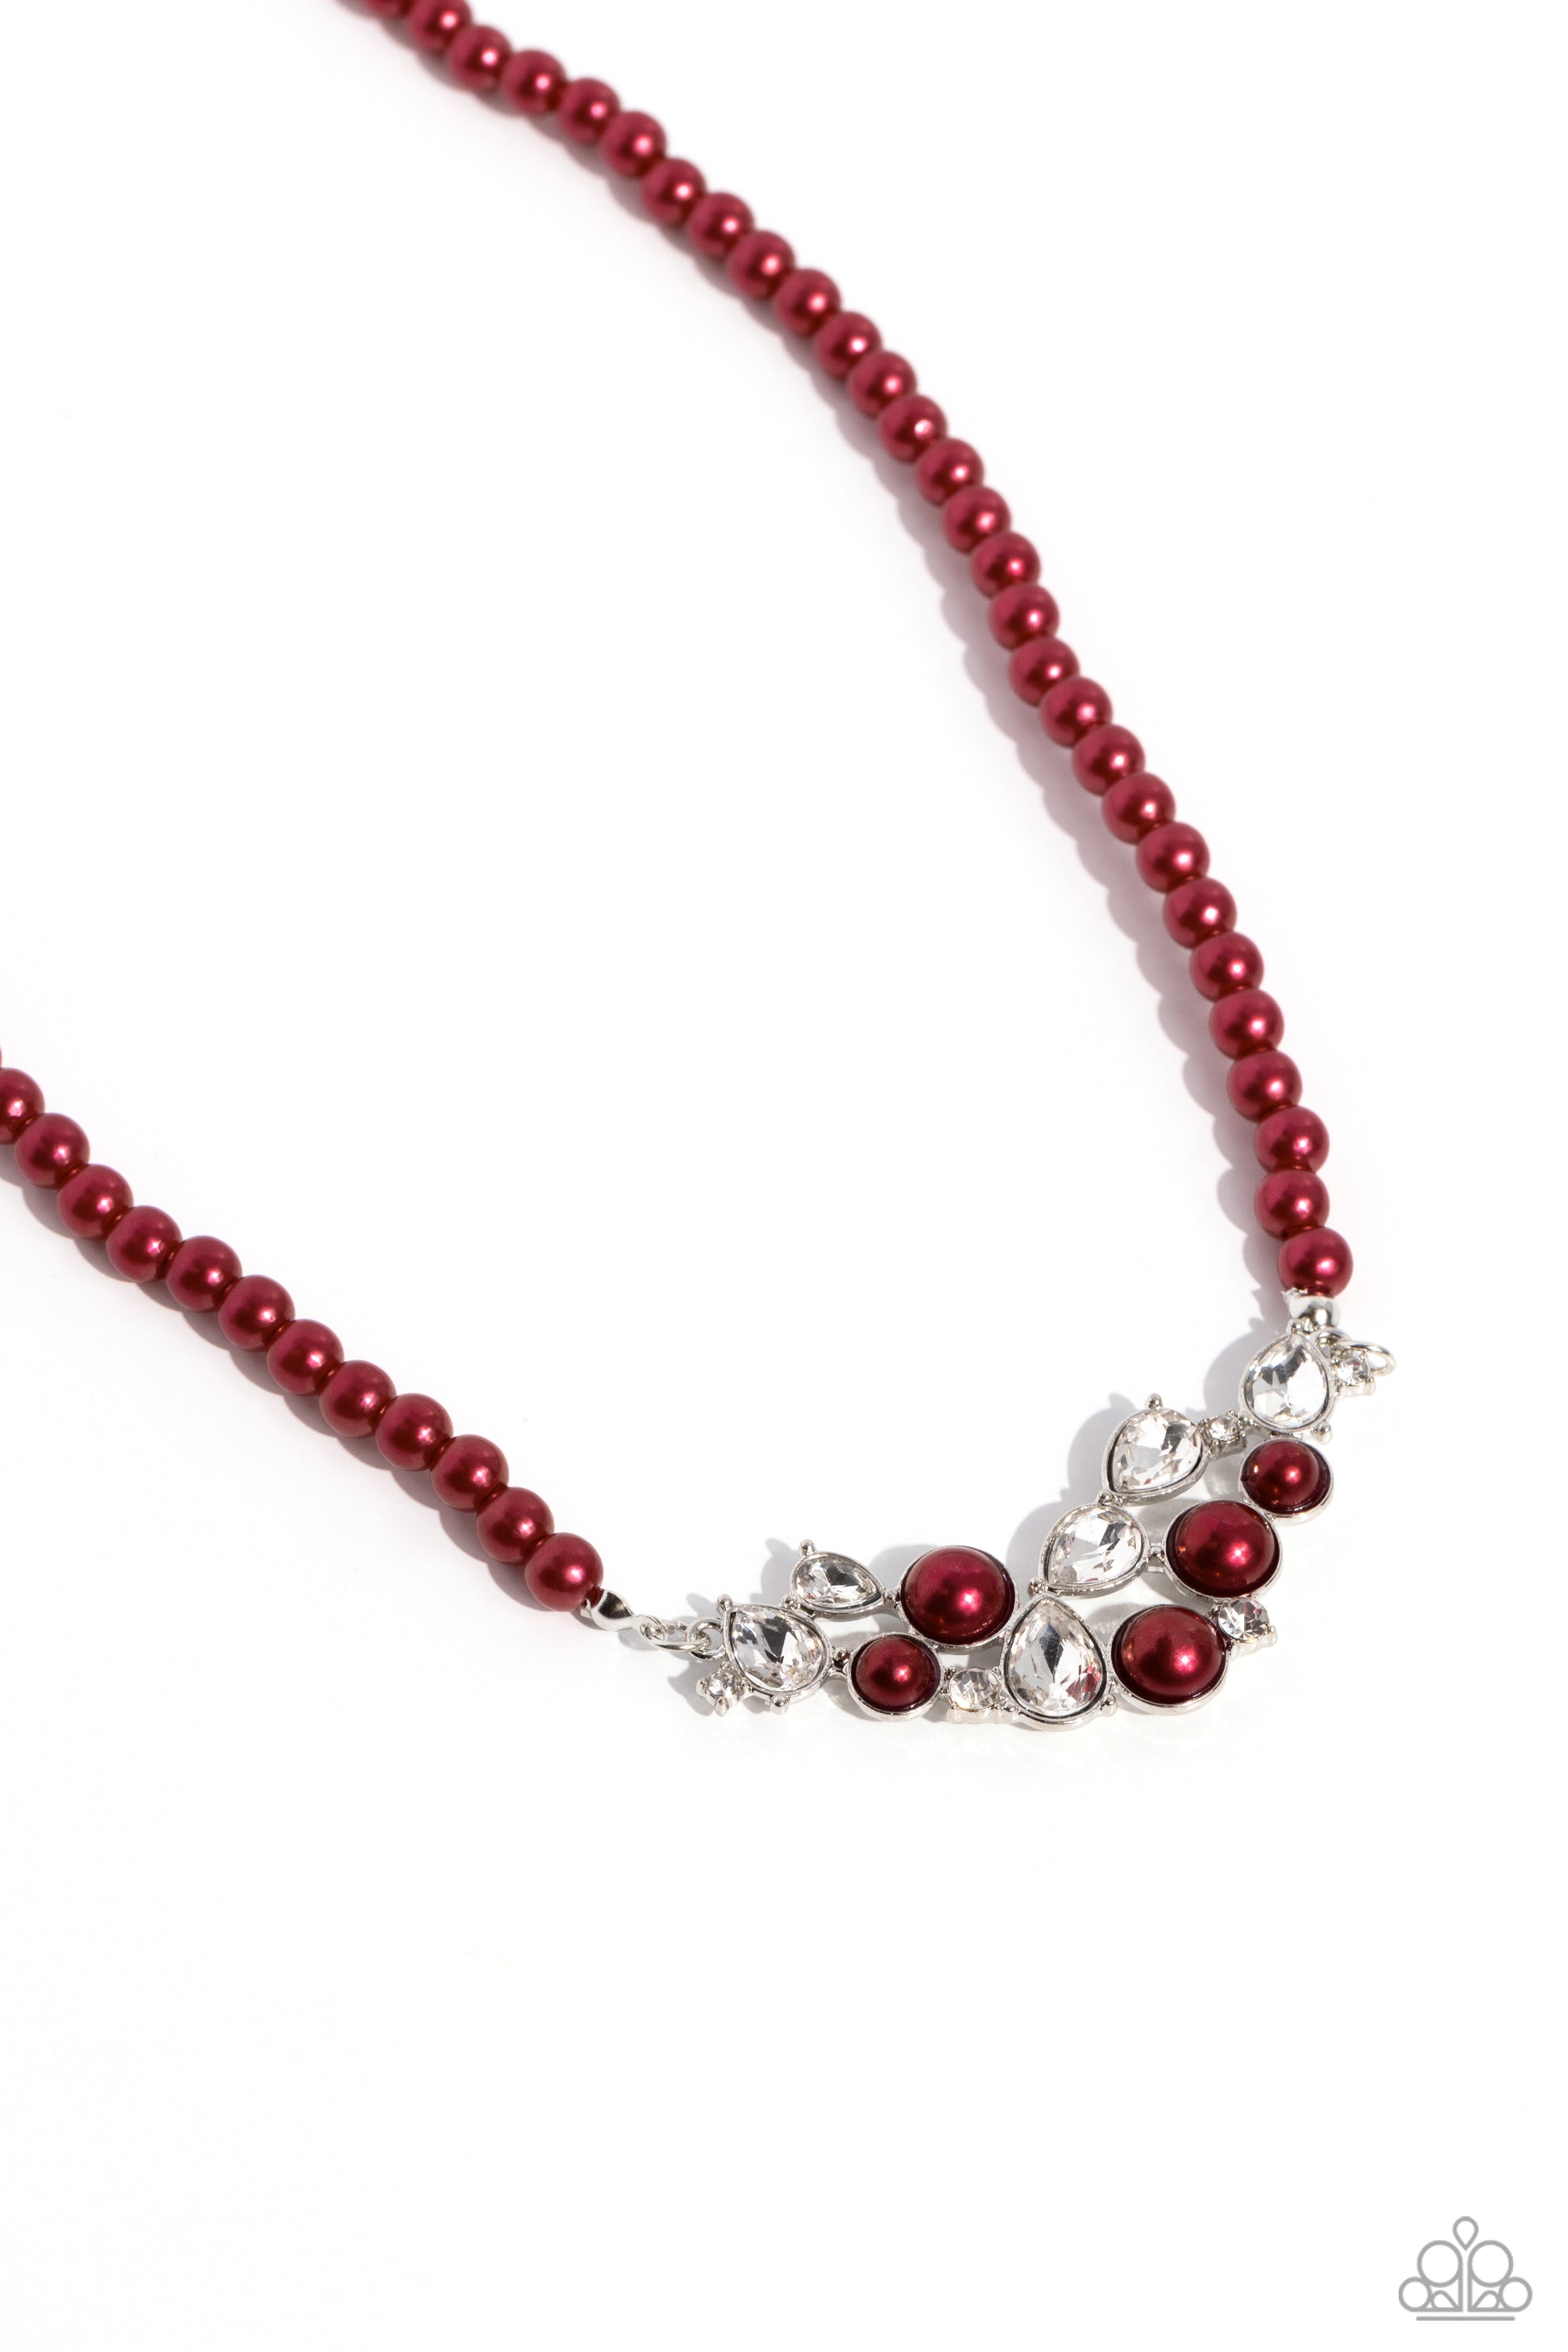 Paparazzi Accessories - Pampered Pearls Red Necklaces a single strand of wine pearls elegantly cascades below the collar to meet a refined collection of wine pearls in varying sizes and white gems pressed in round and teardrop frames for a sparkly finish. Features an adjustable clasp closure.  Sold as one individual necklace. Includes one pair of matching earrings.